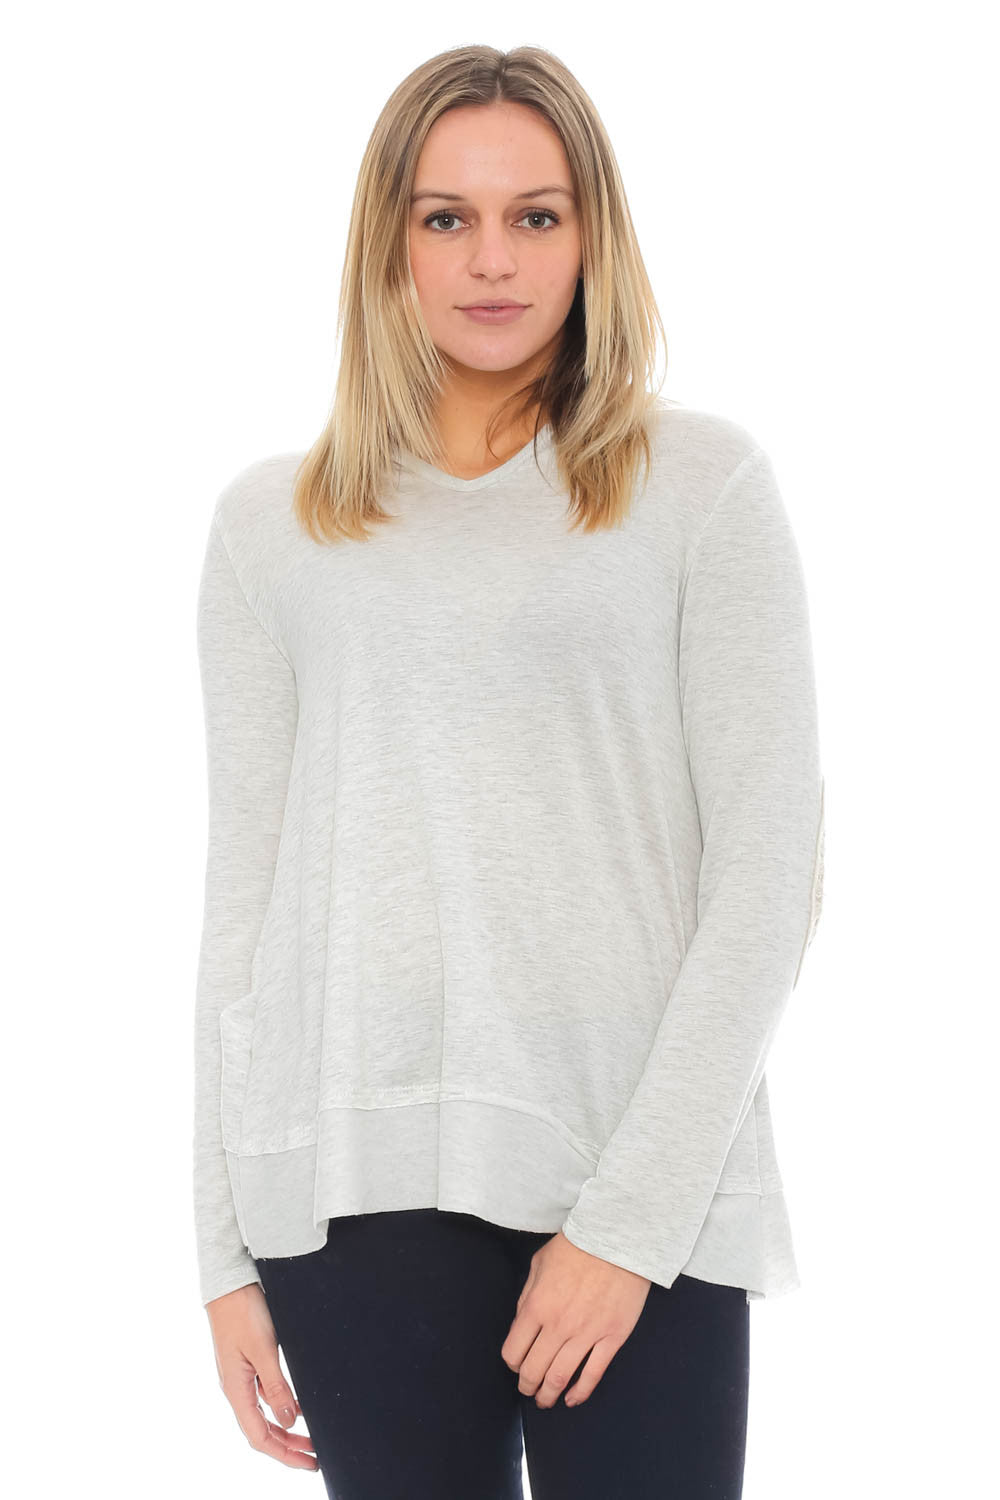 Sweater - Overlap Back Hoodie with Lace Elbow Patches by Paper Crane